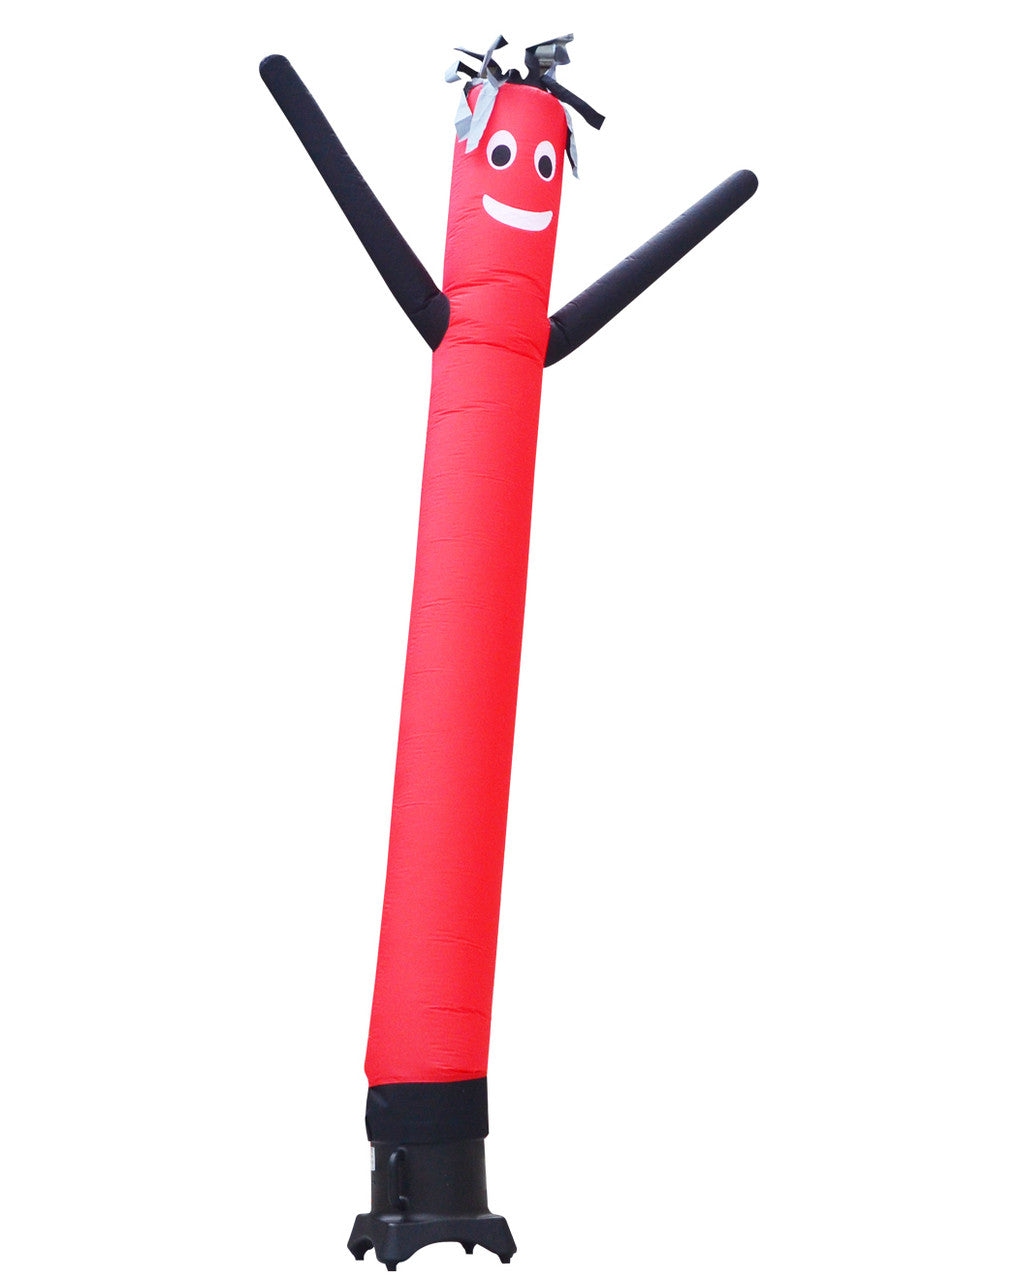 10ft Red Air Dancer with Black Arms Inflatable Wacky Wavy Tube Man